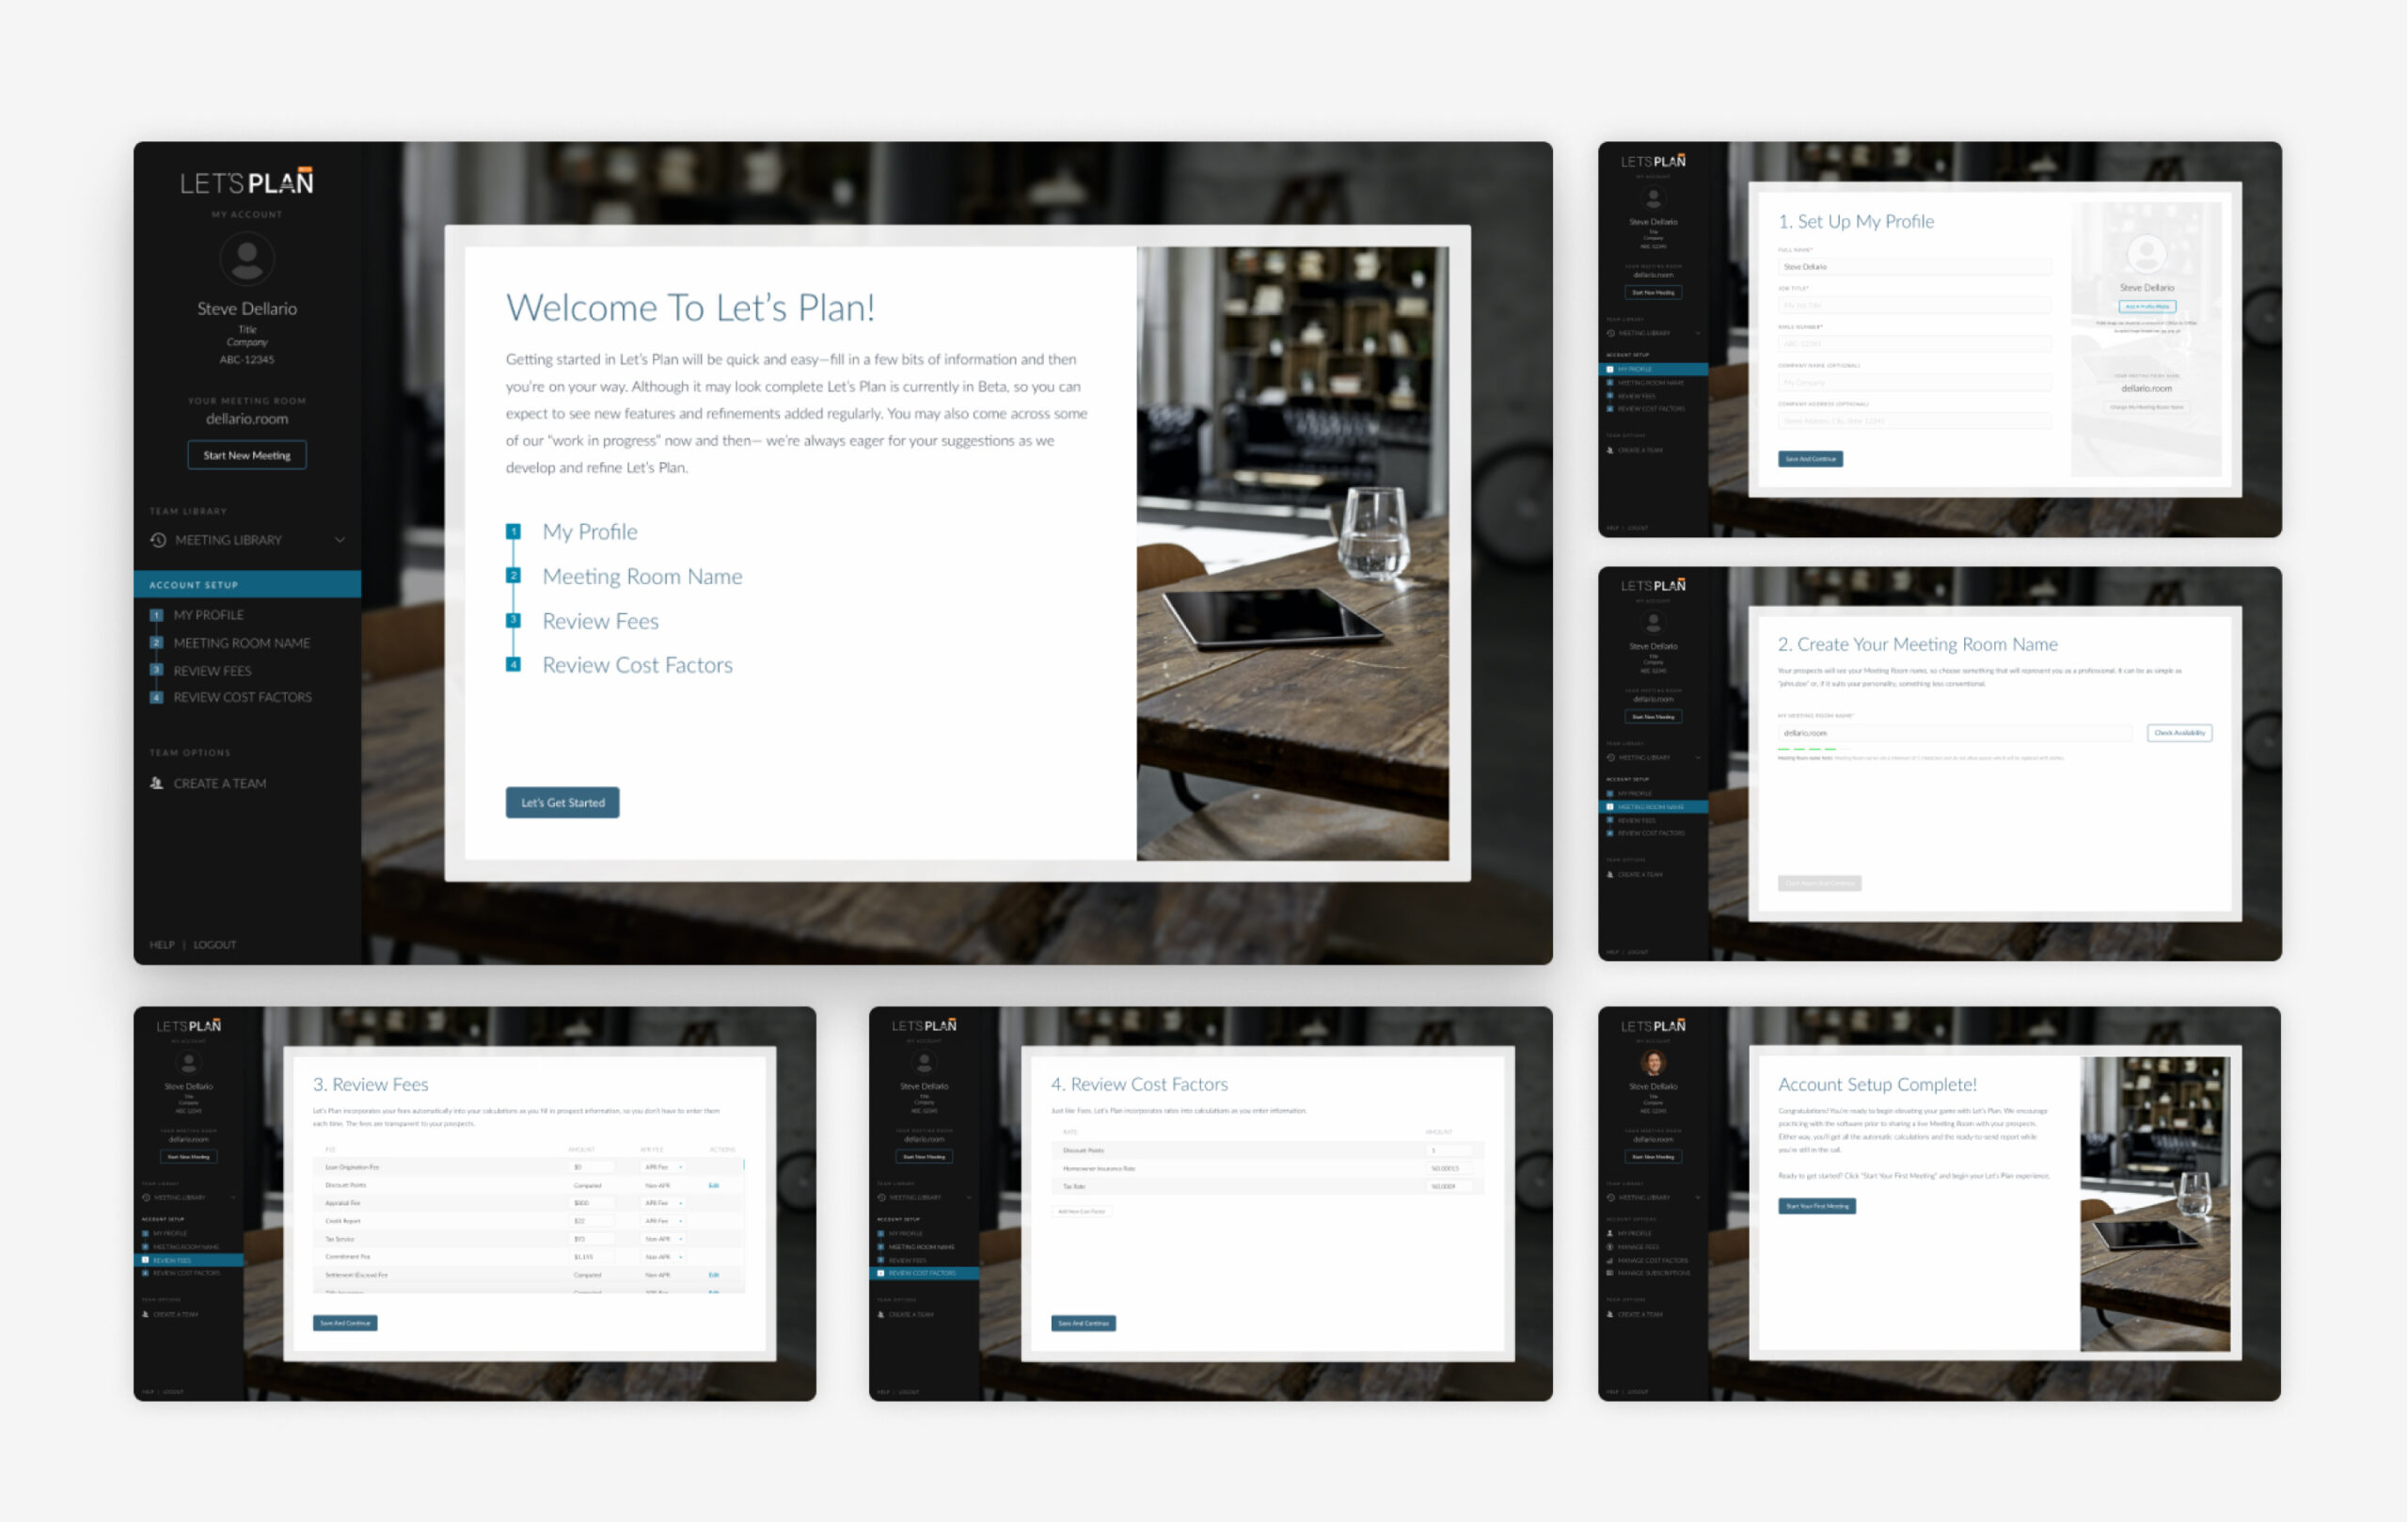 Sample screens of the MLO Onboarding experience